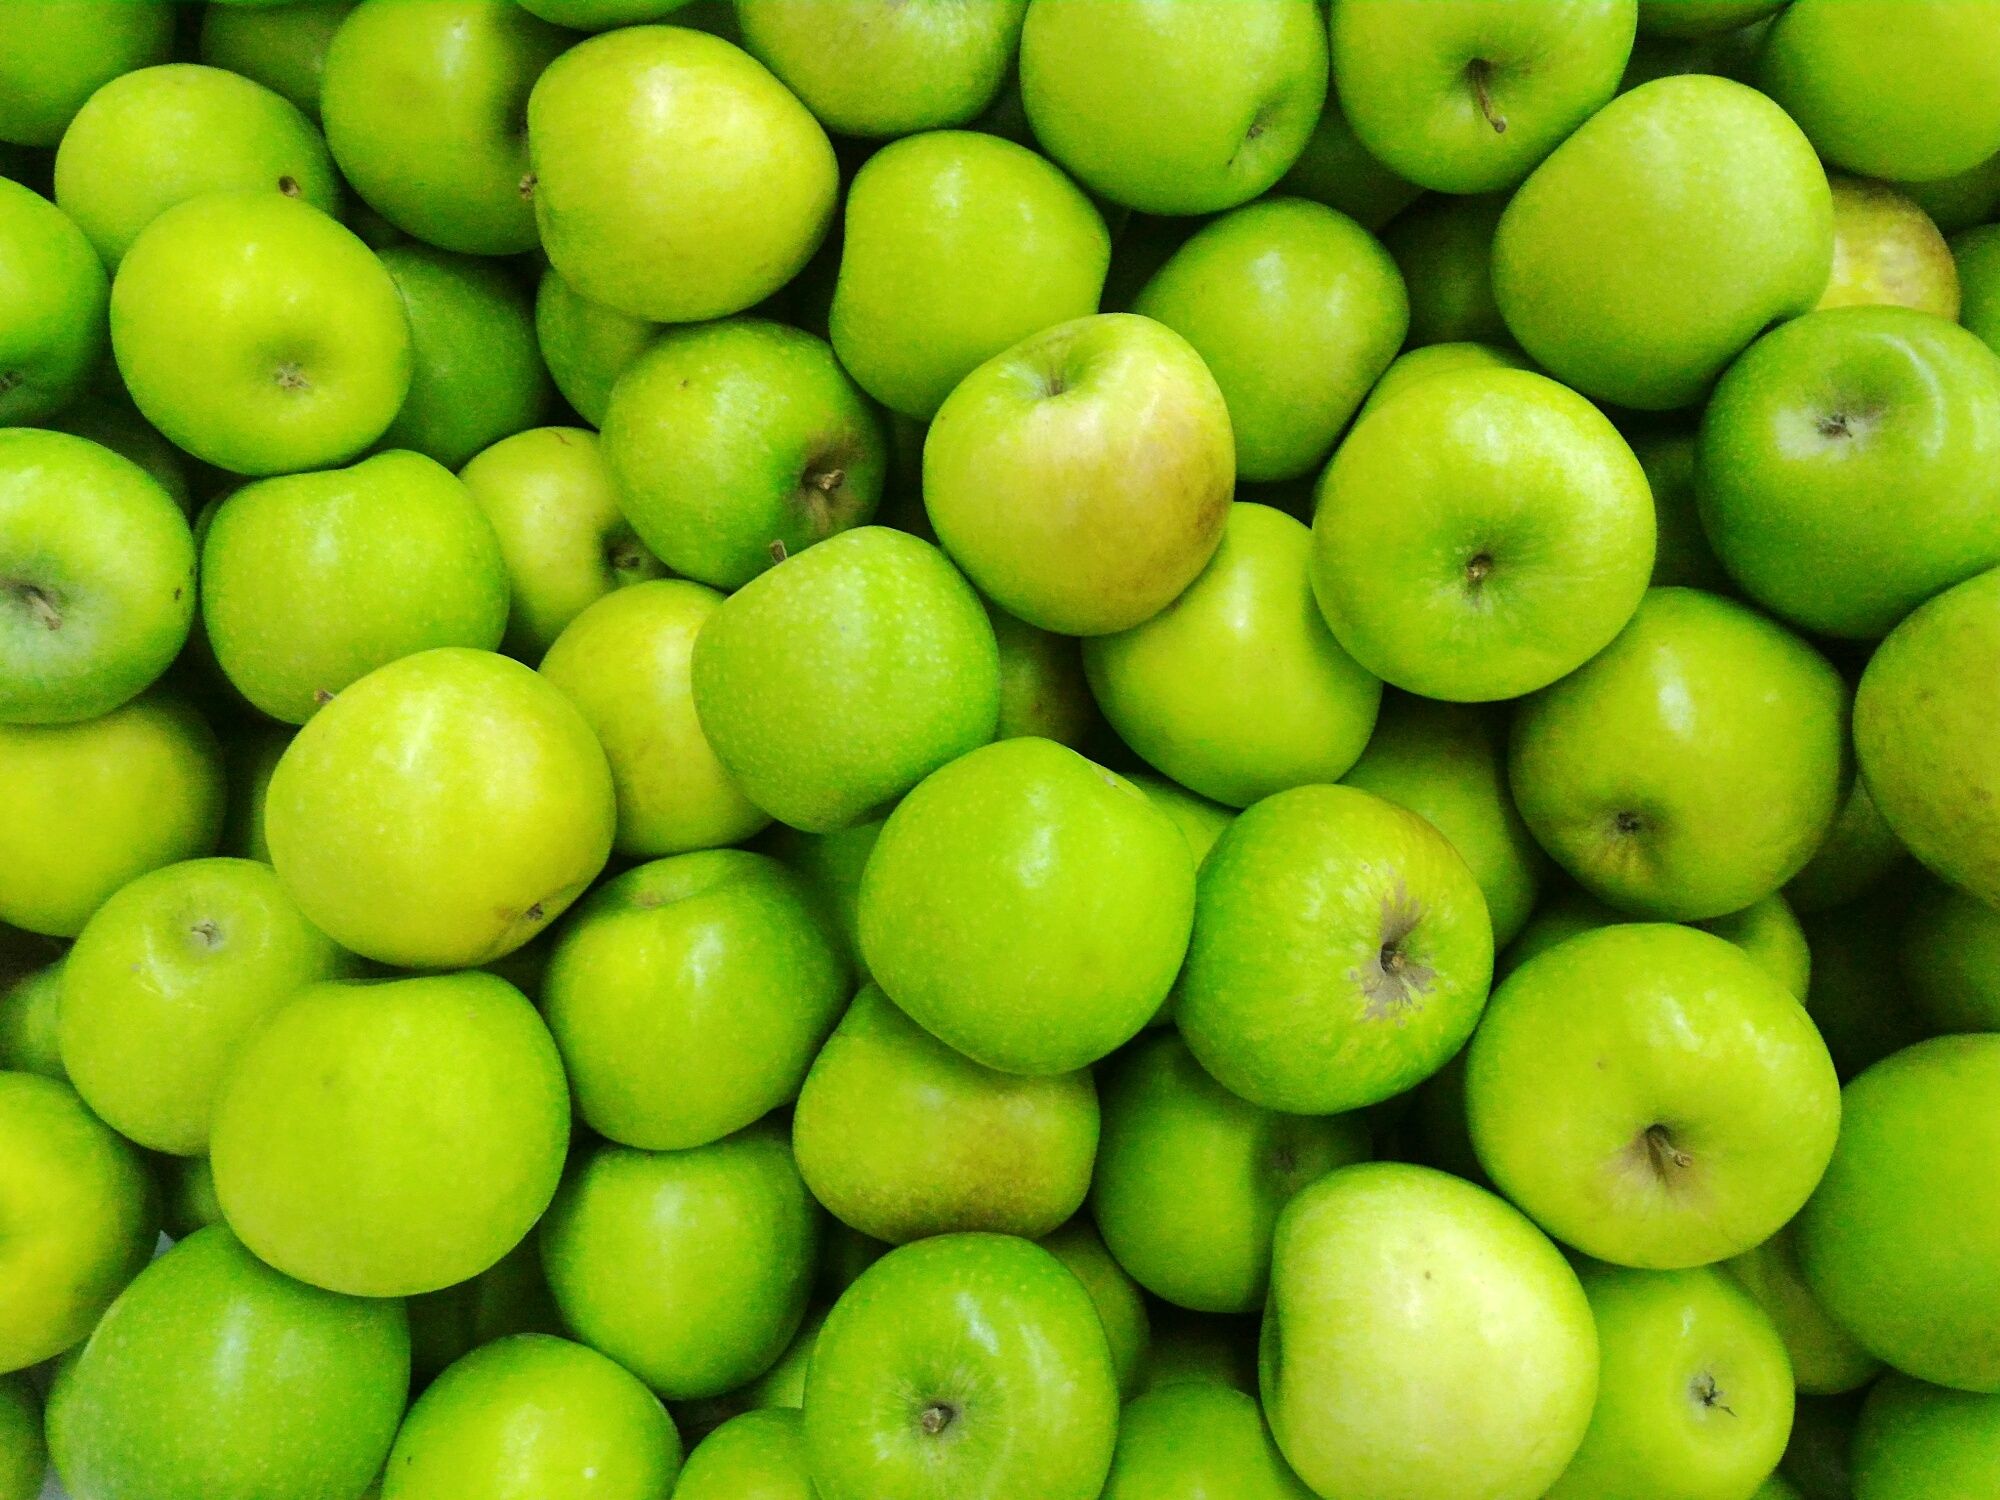 American Apple Varieties and Characteristics - Alphabetical Listing